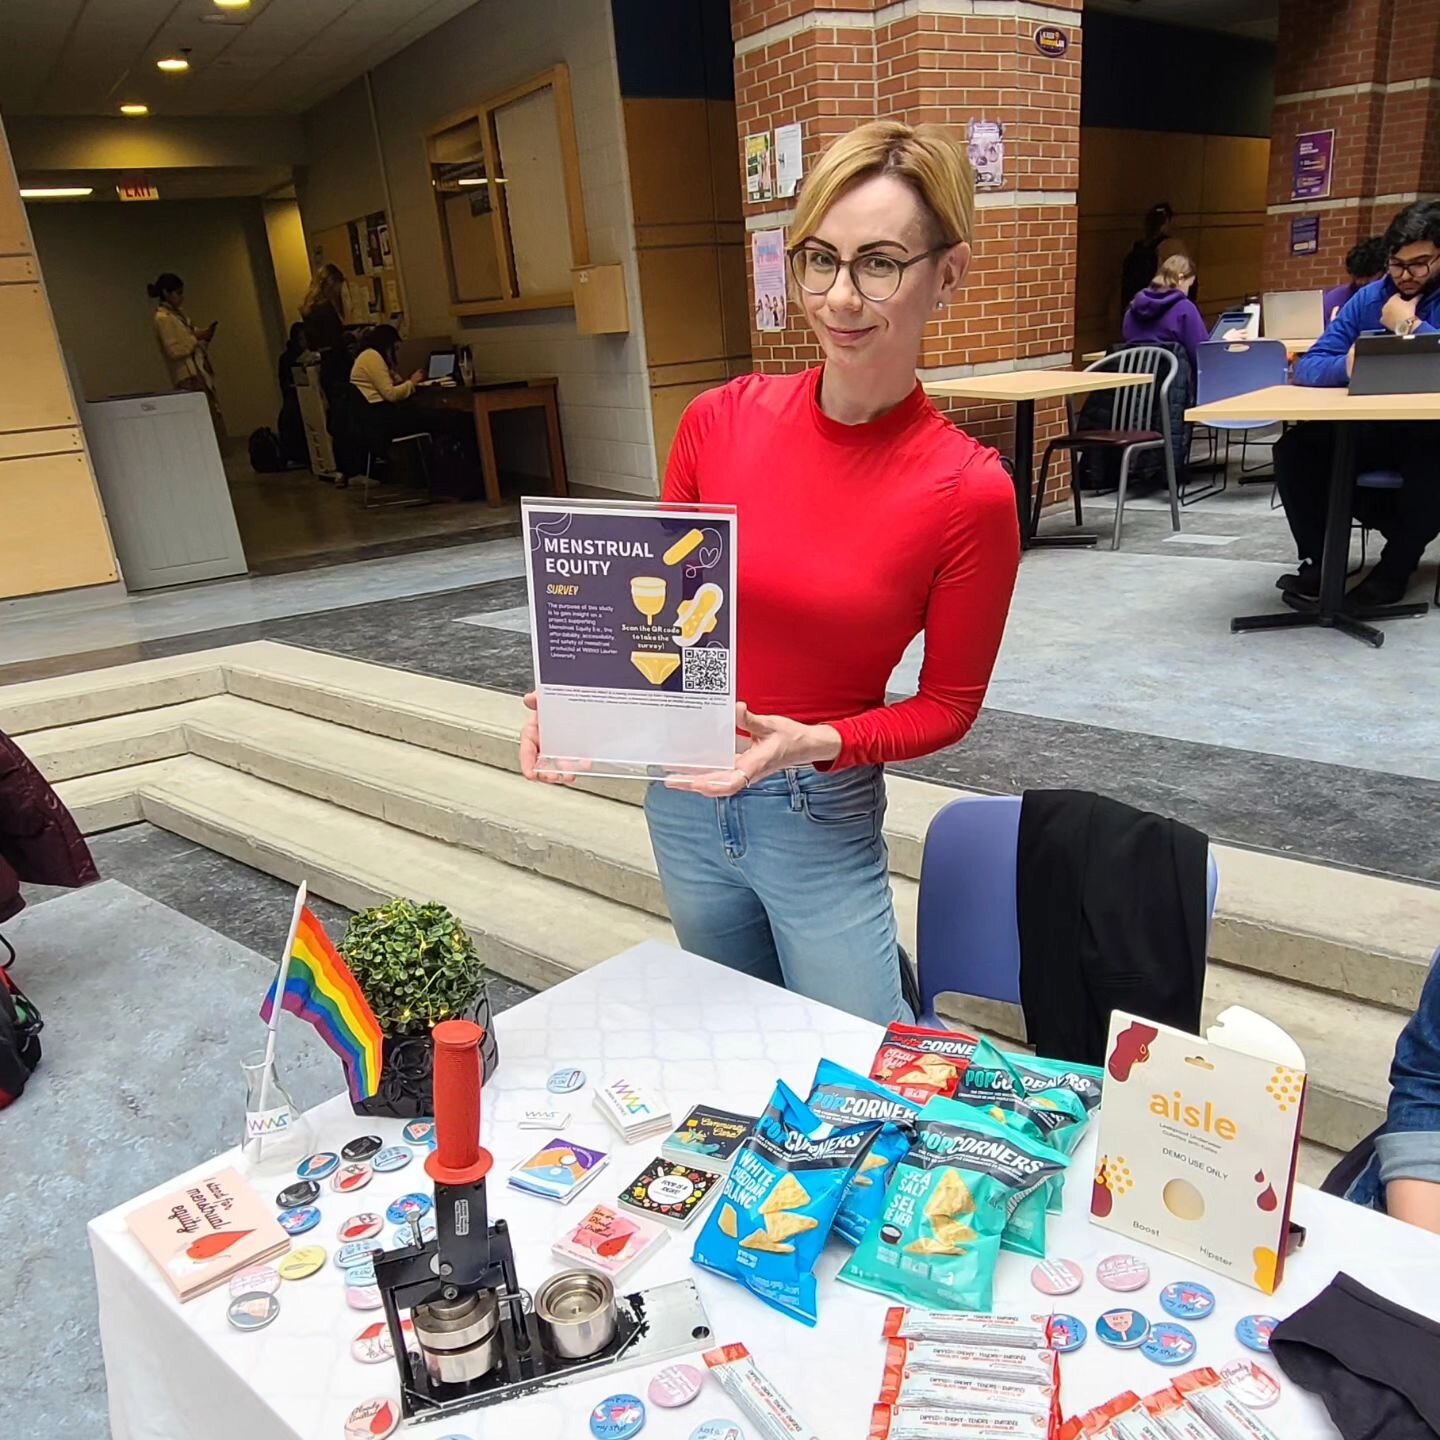 Come visit us in the Science Atrium today until 1pm, and then the Concourse from 2 to 4pm! Grab some period swag, a snack, talk about access on on campus and learn about reusable period products with @lauriergreen.

Have you filled out the survey yet